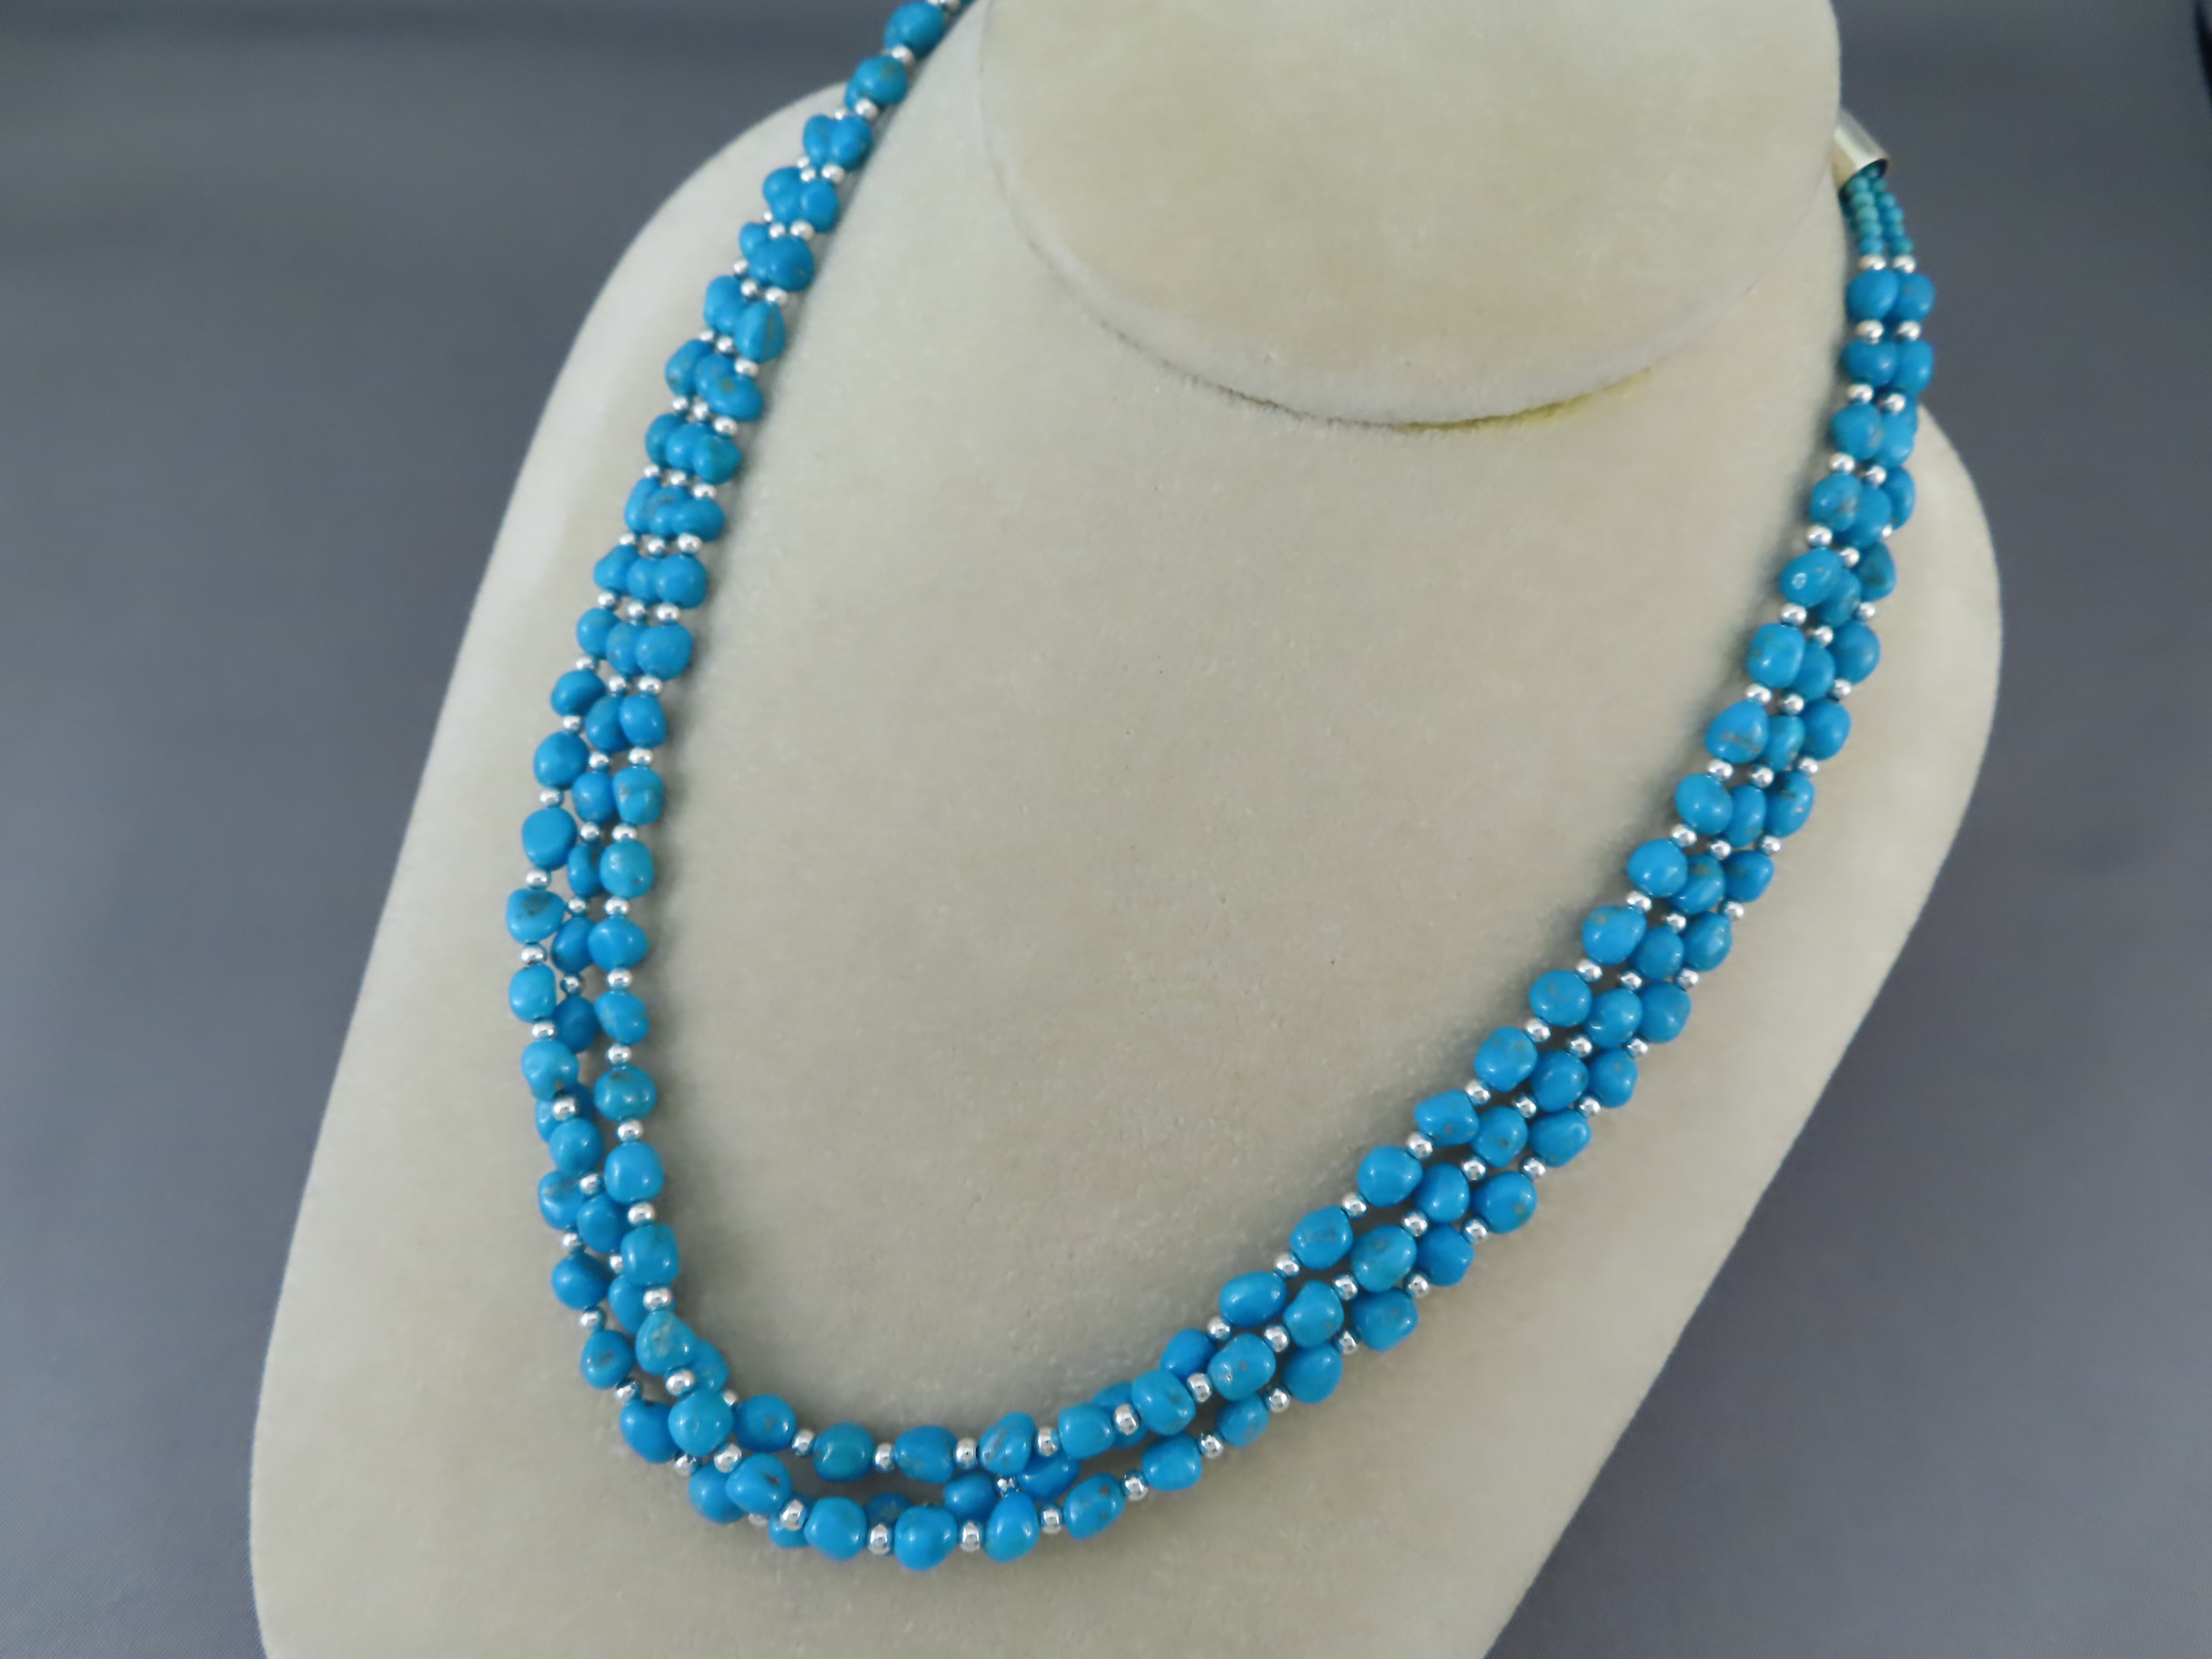 3-Strand Sleeping Beauty Turquoise & Sterling Silver Necklace | Turquoise